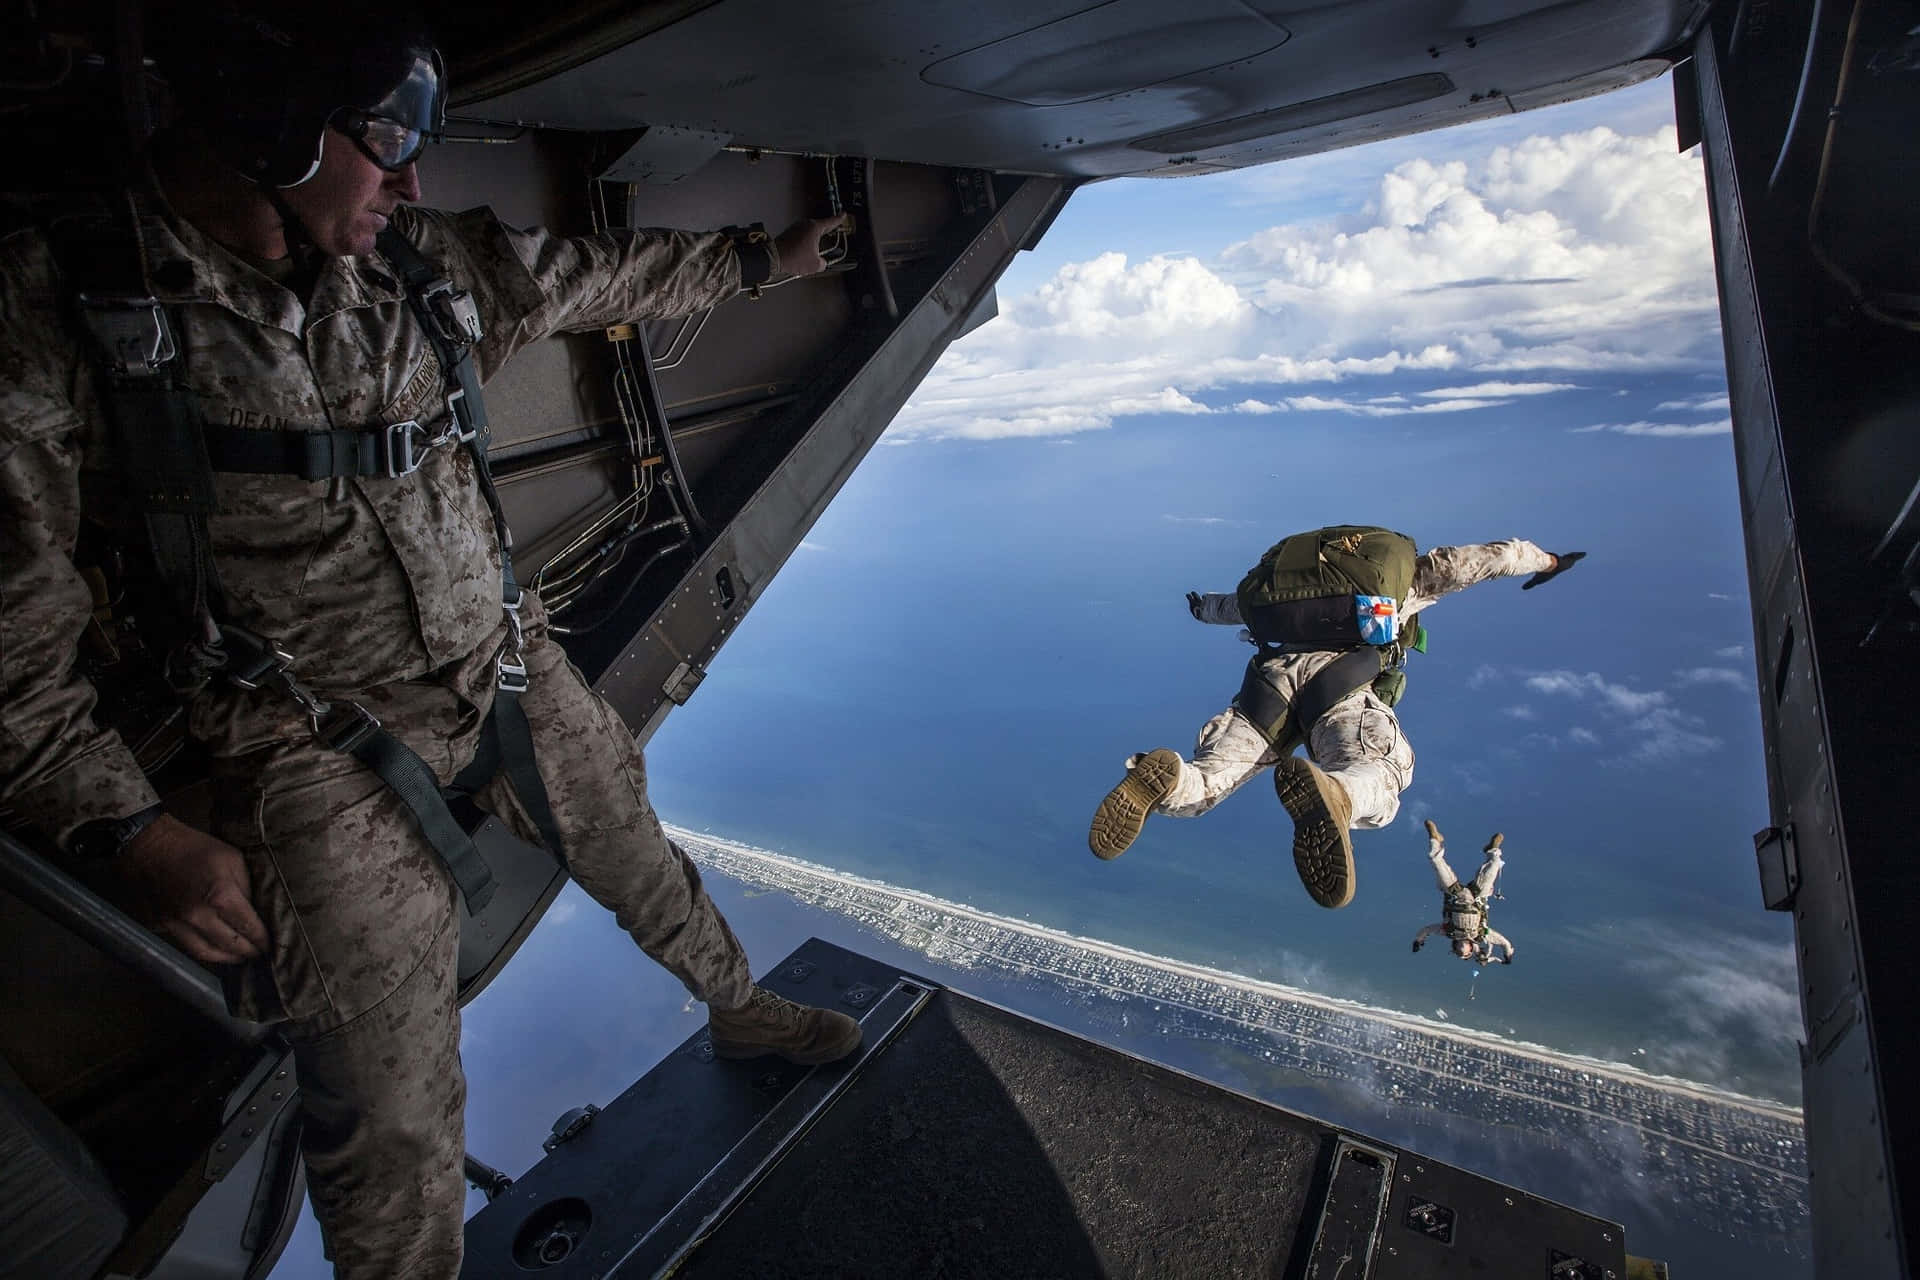 Military Deployment Via Skydiving Background